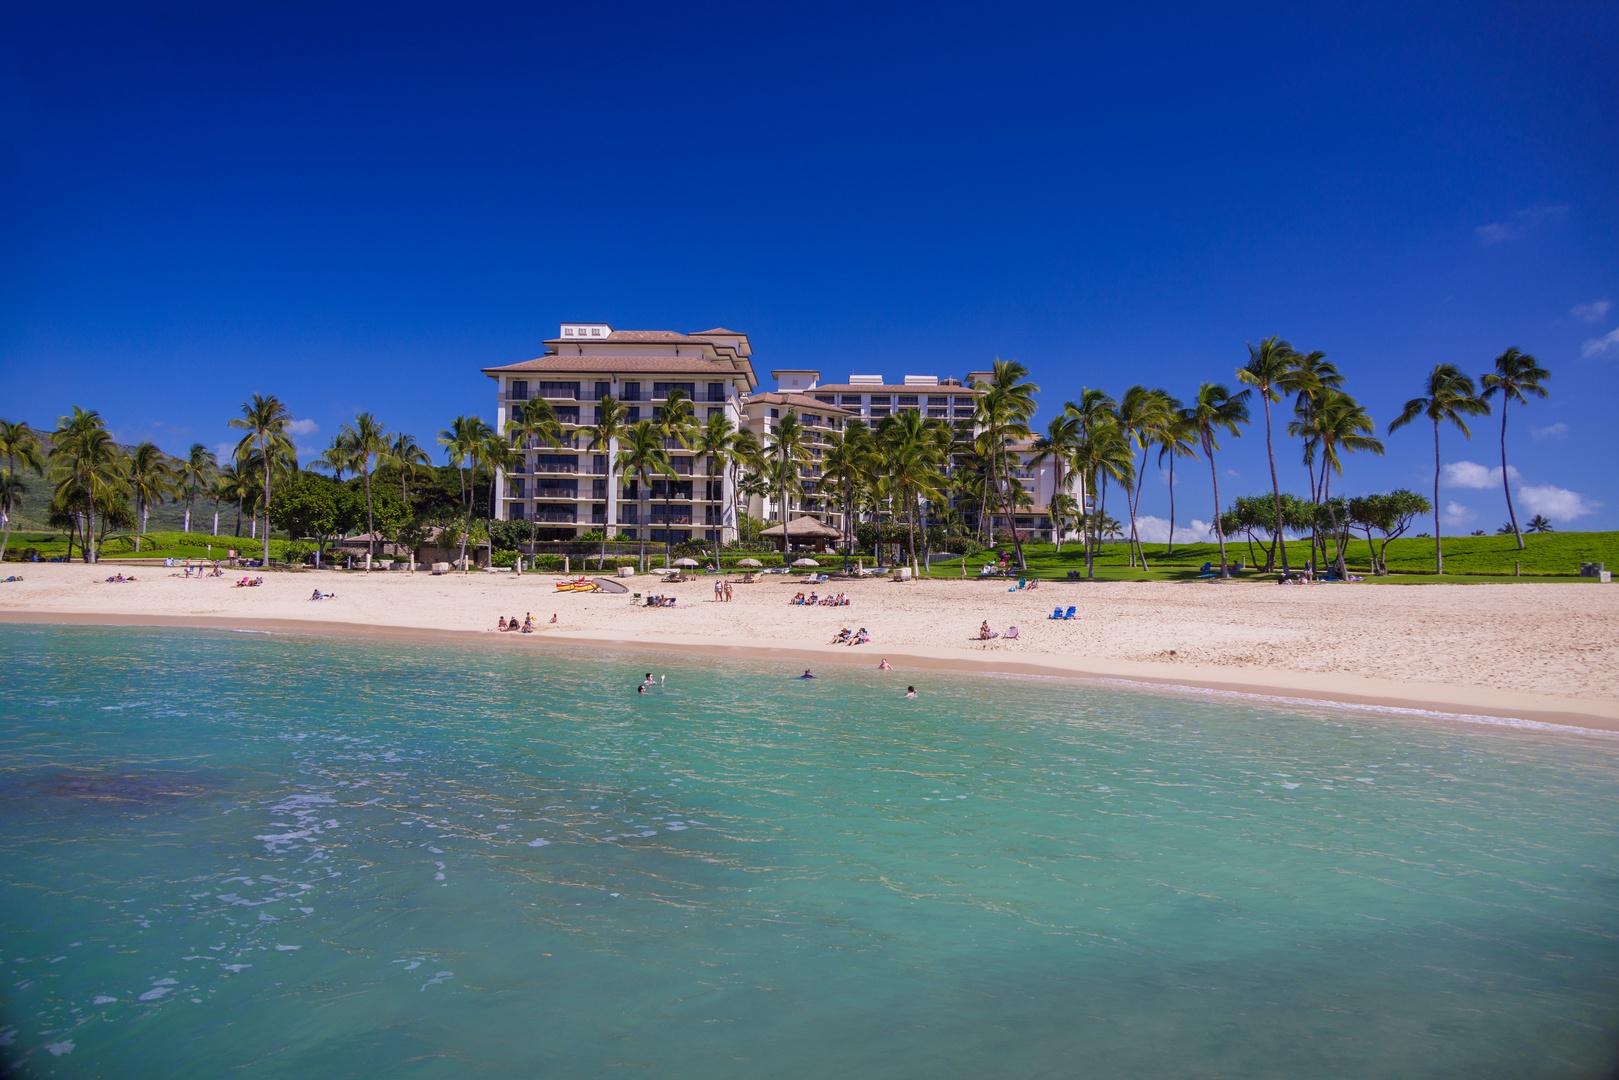 Kapolei Vacation Rentals, Ko Olina Kai 1051D - Ko Olina's private lagoons with soft sands and crystal blue water, perfect for afternoon swim or spectacular views.